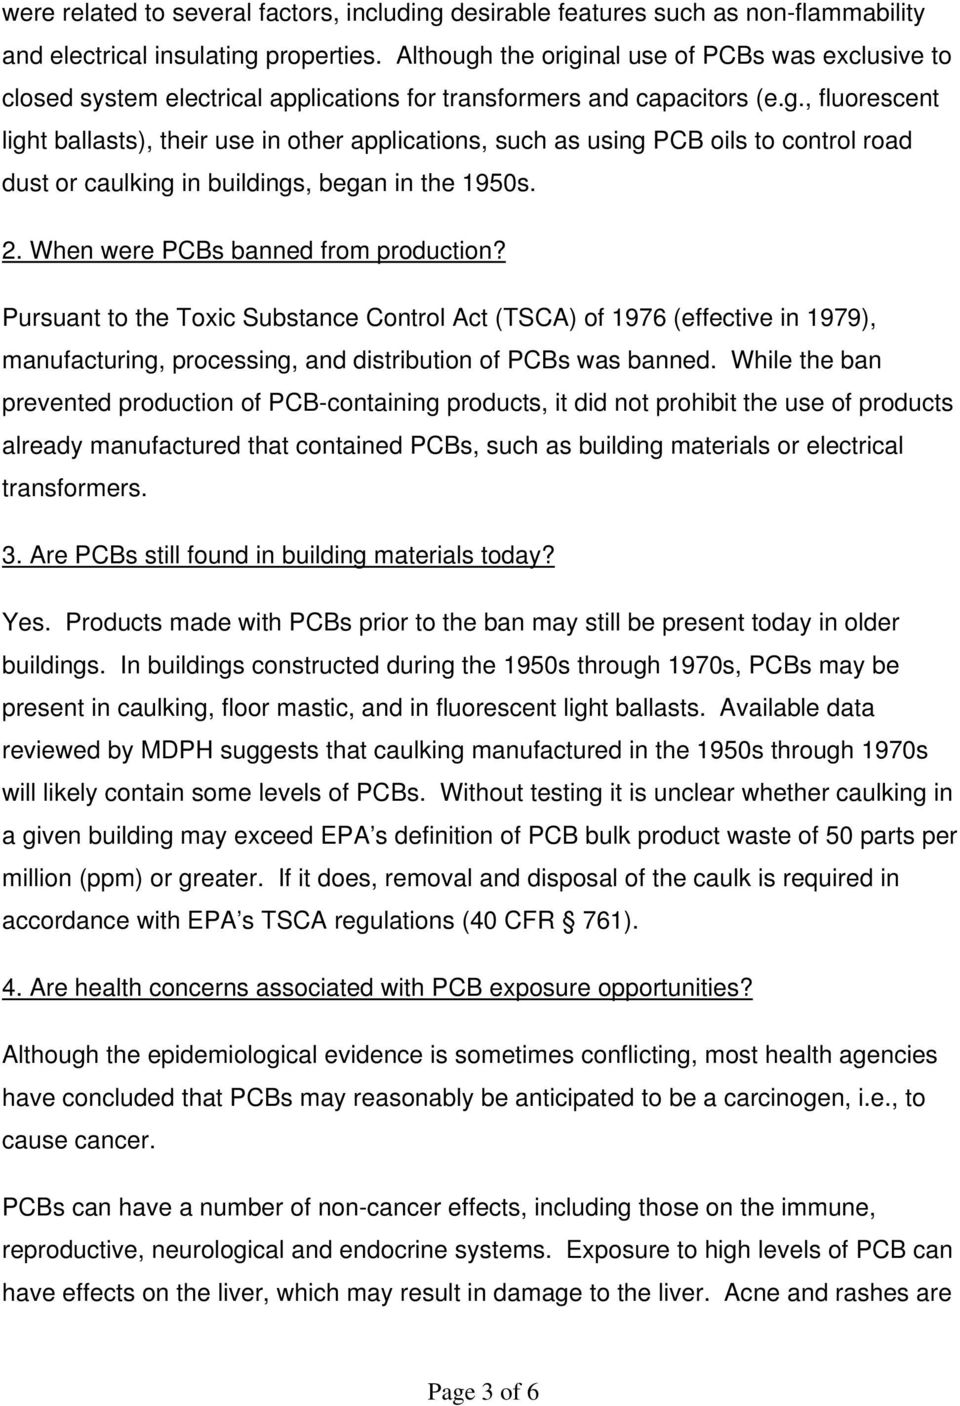 2. When were PCBs banned from production? Pursuant to the Toxic Substance Control Act (TSCA) of 1976 (effective in 1979), manufacturing, processing, and distribution of PCBs was banned.